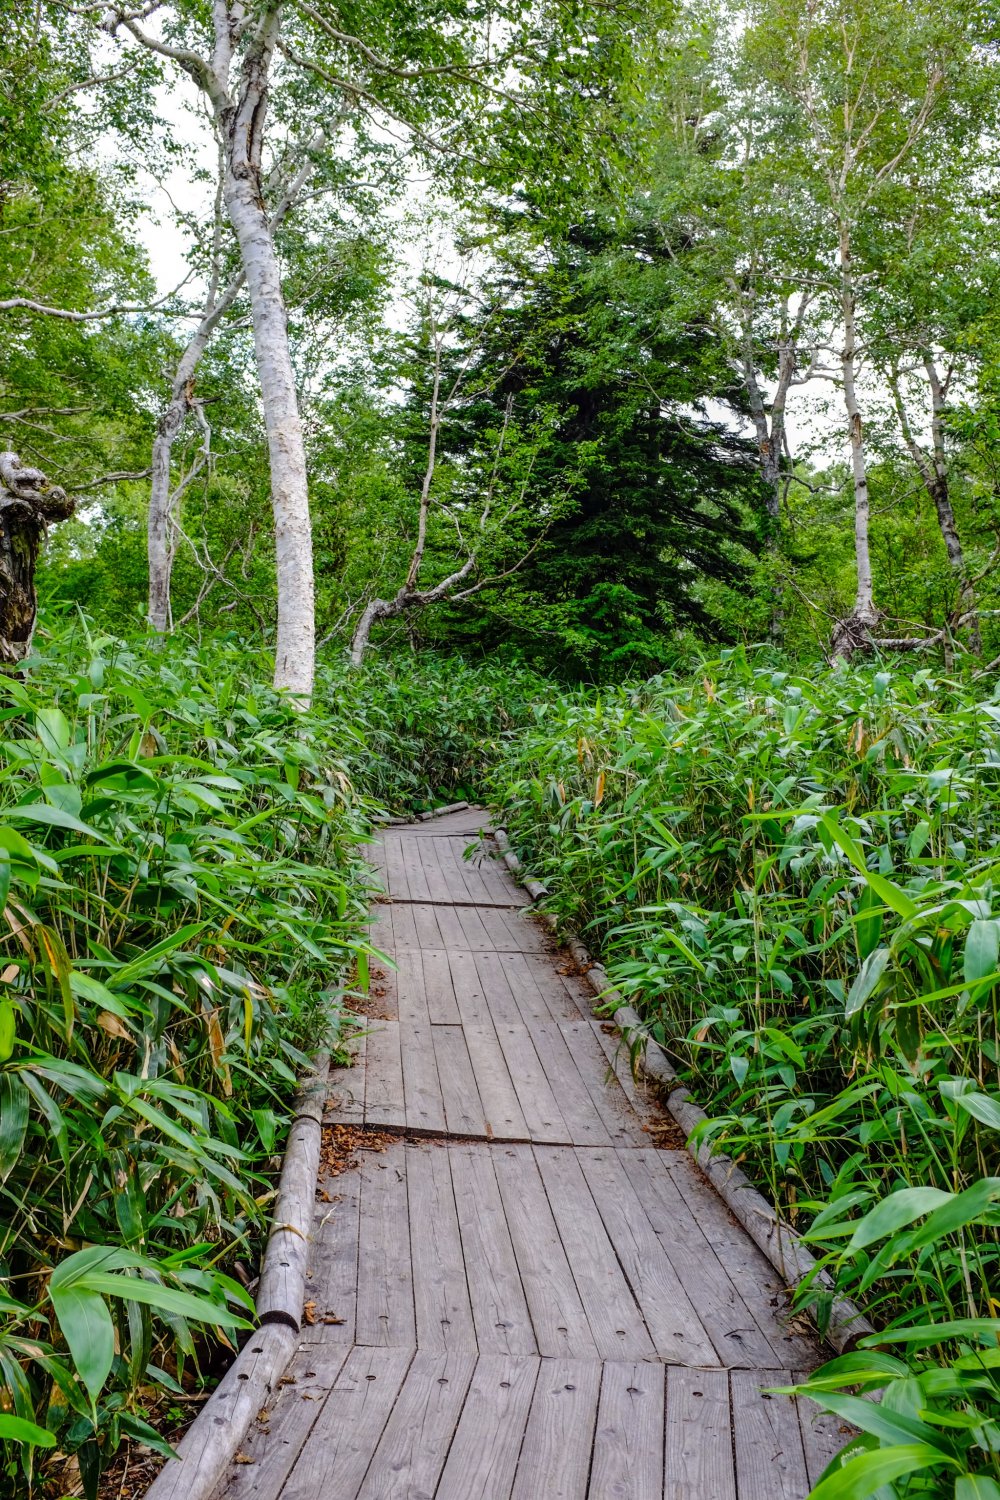 The raised wooden board walk makes you feel right in the heart of nature